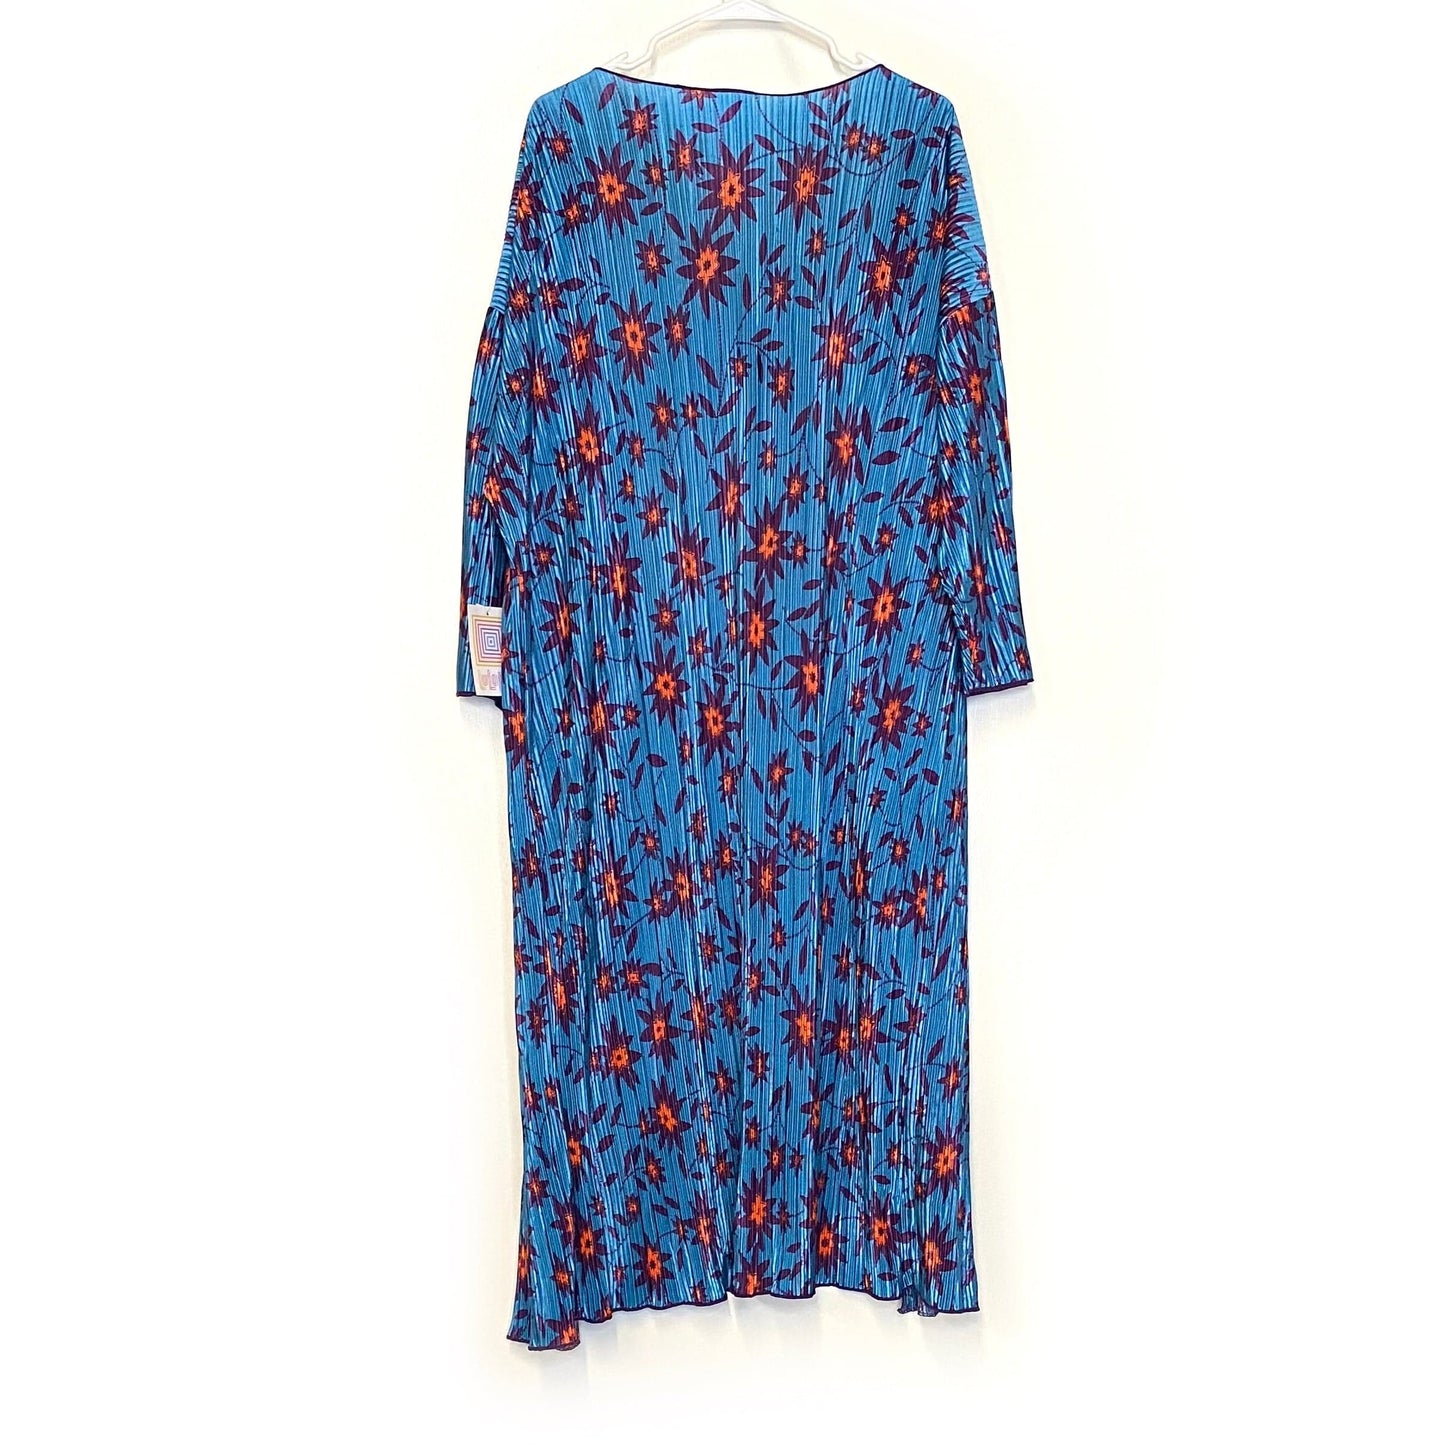 LuLaRoe Womens Size L Cerulean Blue Shirley Floral Kimono Cover Up L/s NWT